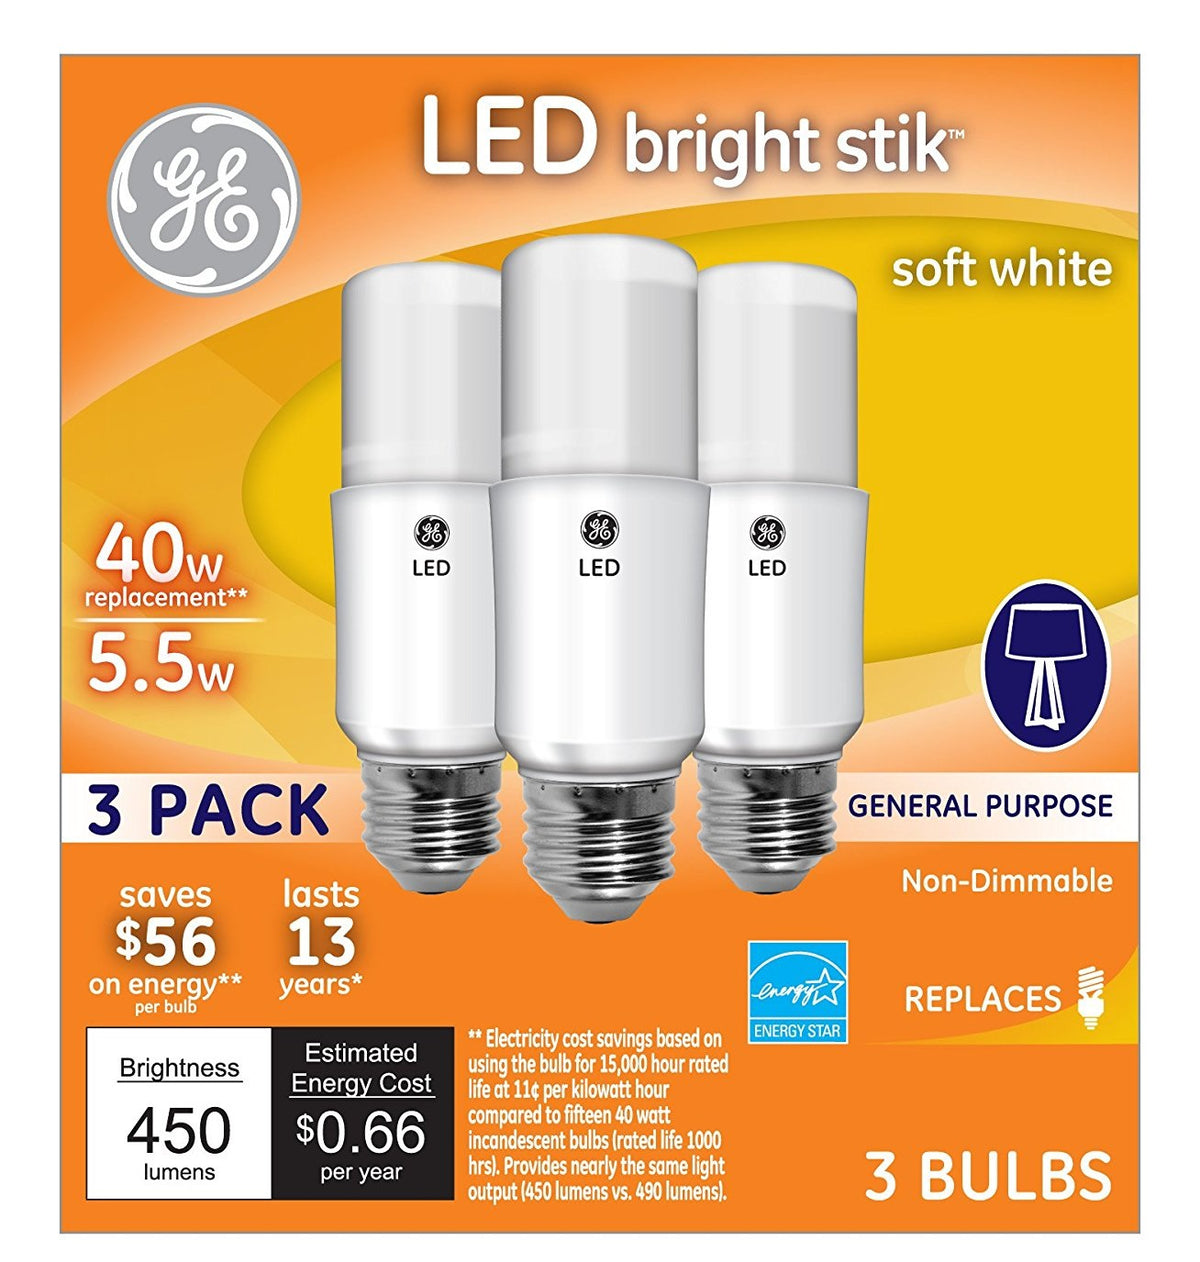 buy led light bulbs at cheap rate in bulk. wholesale & retail outdoor lighting products store. home décor ideas, maintenance, repair replacement parts